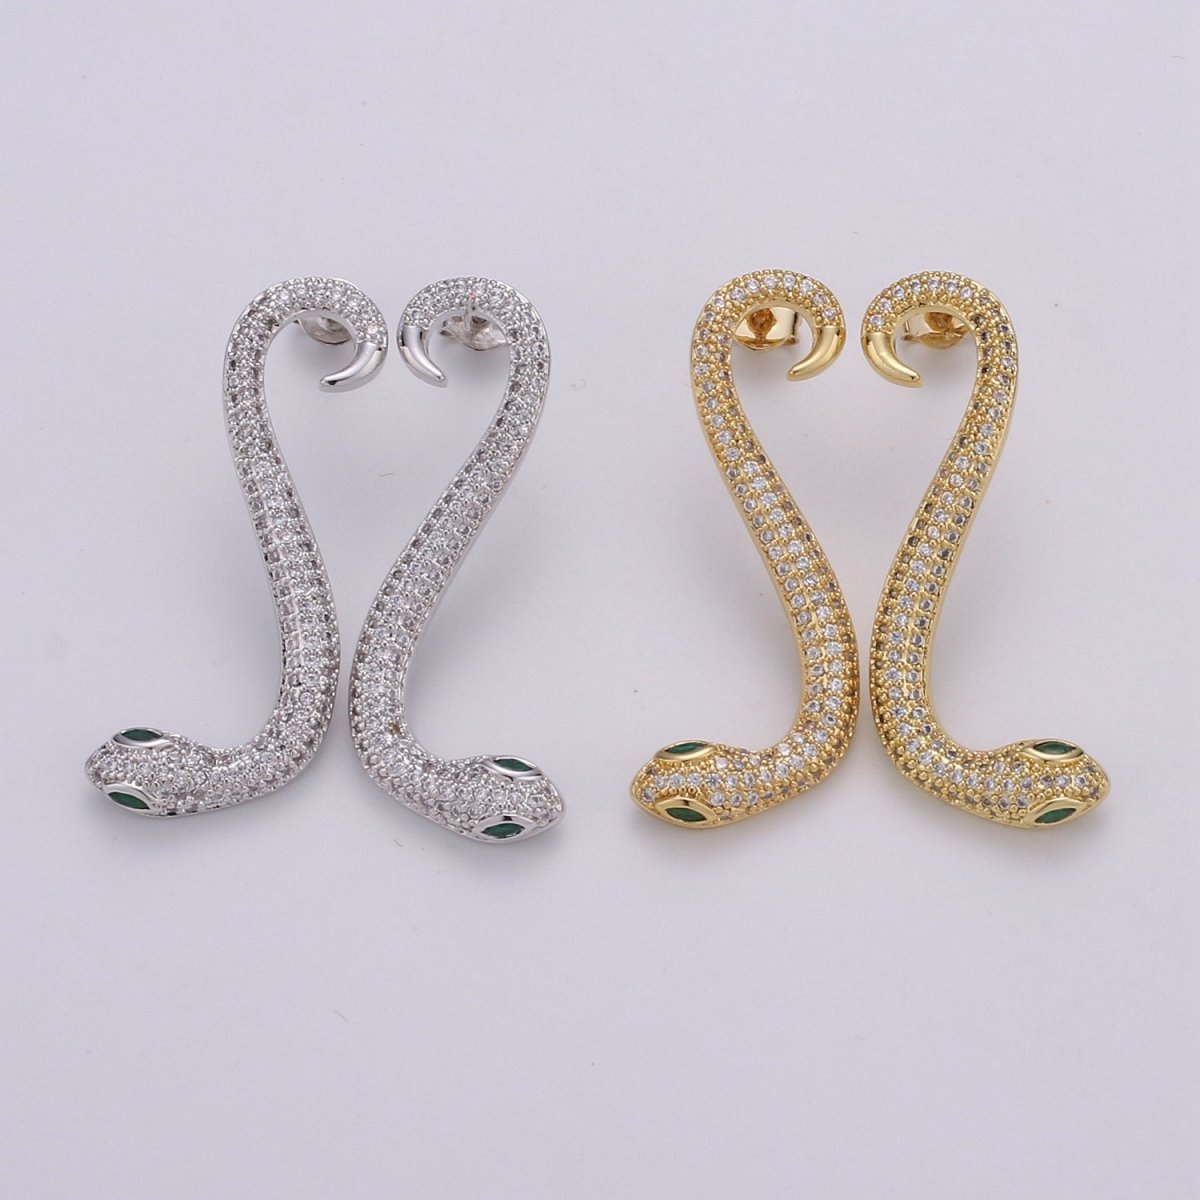 Gold snake earrings asp cleopatra toga serpent dangle 40mm long lightweight earrings Serpent snake Jewelry Micro pave Stud Earring Q-172 Q-173 - DLUXCA